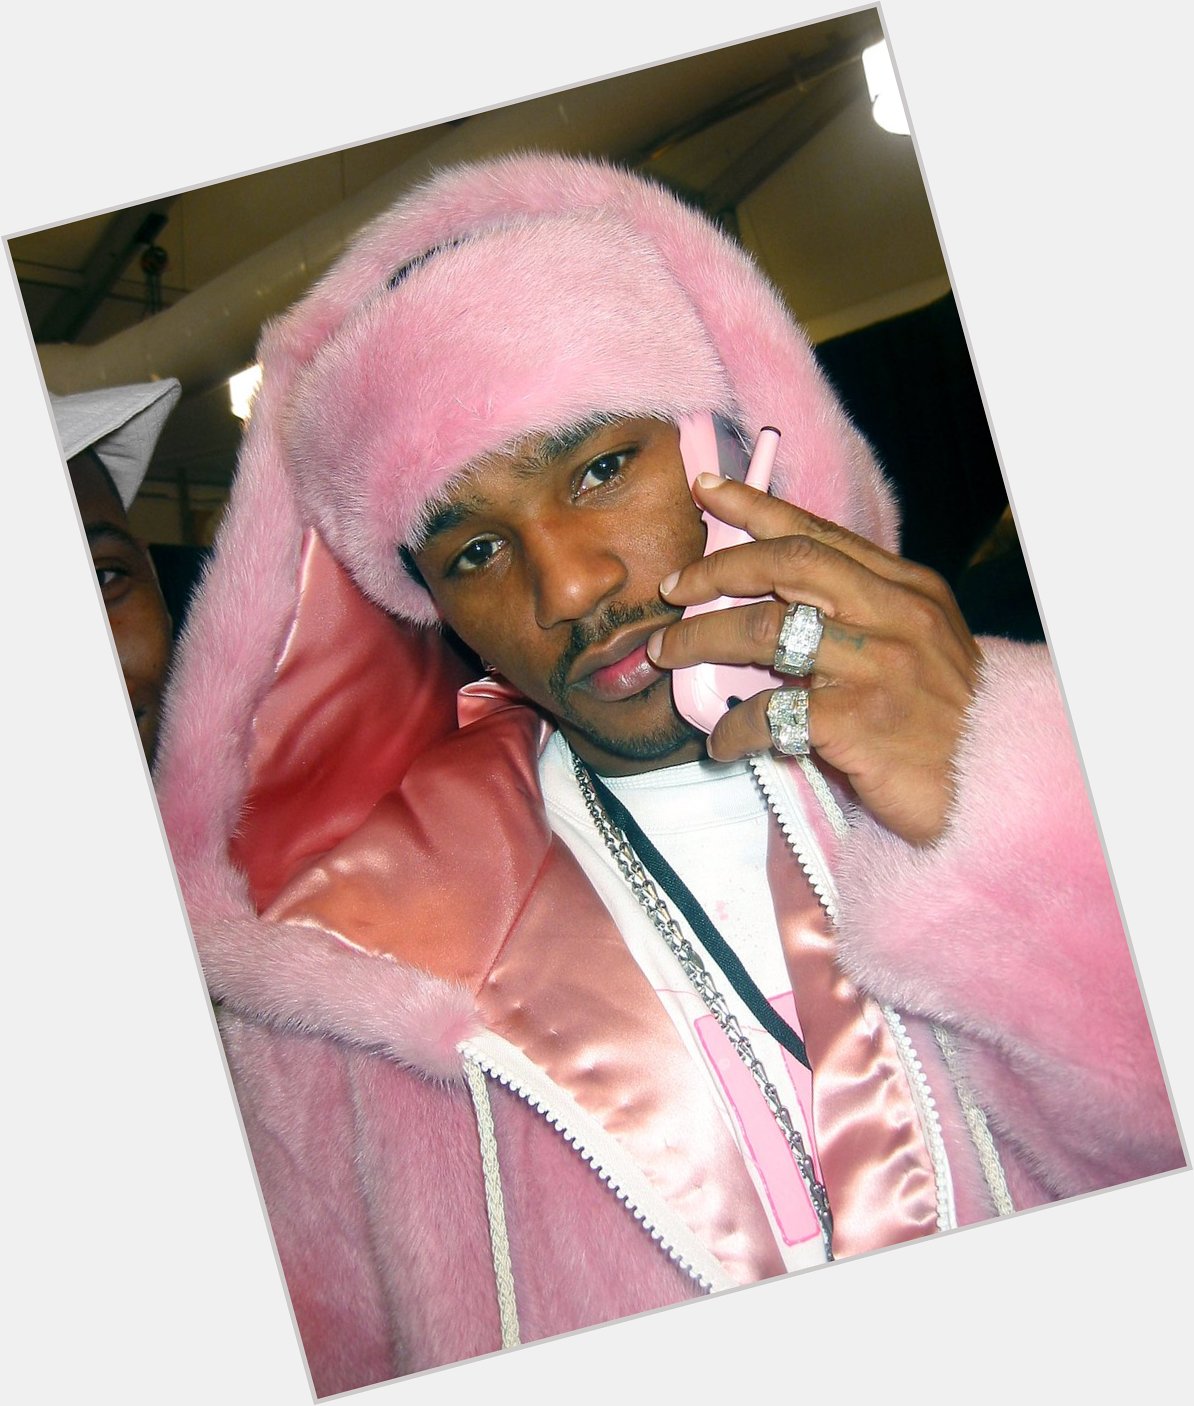 Happy birthday Cam ron tha goat DIPSET
Guy Pulled the best fit in history 